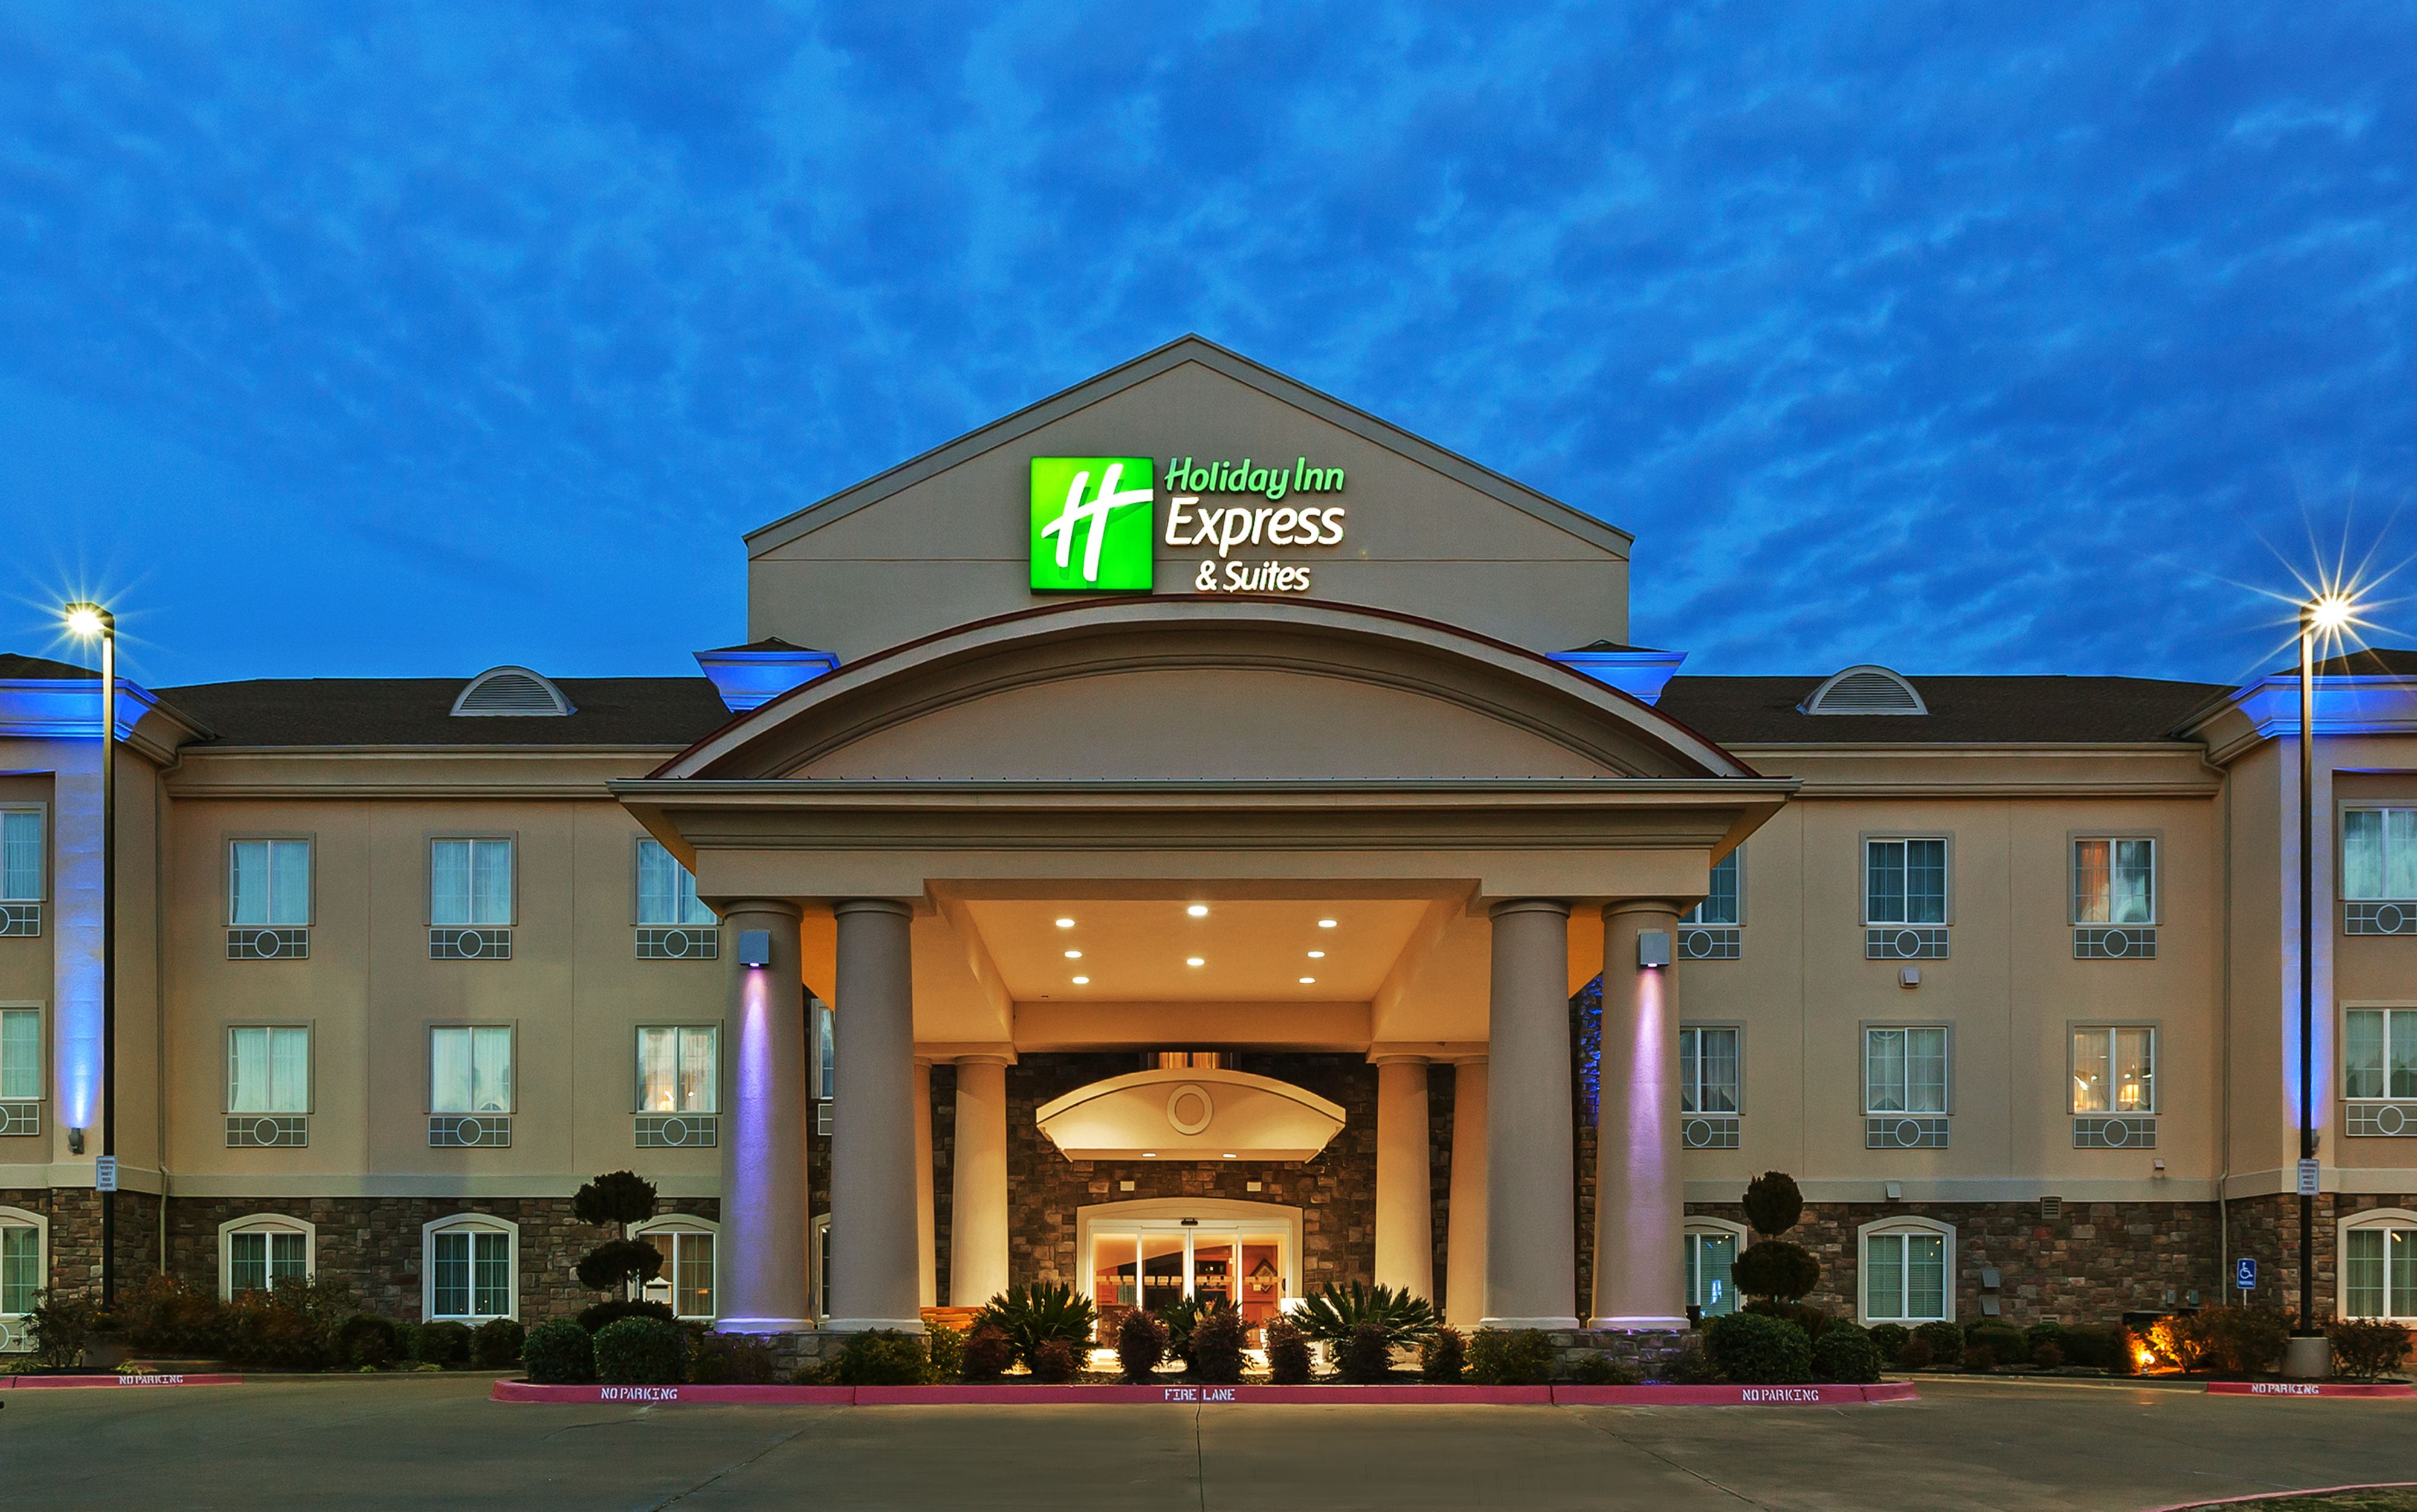 Holiday Inn Express & Suites Kerrville Coupons Kerrville TX near me | 8coupons